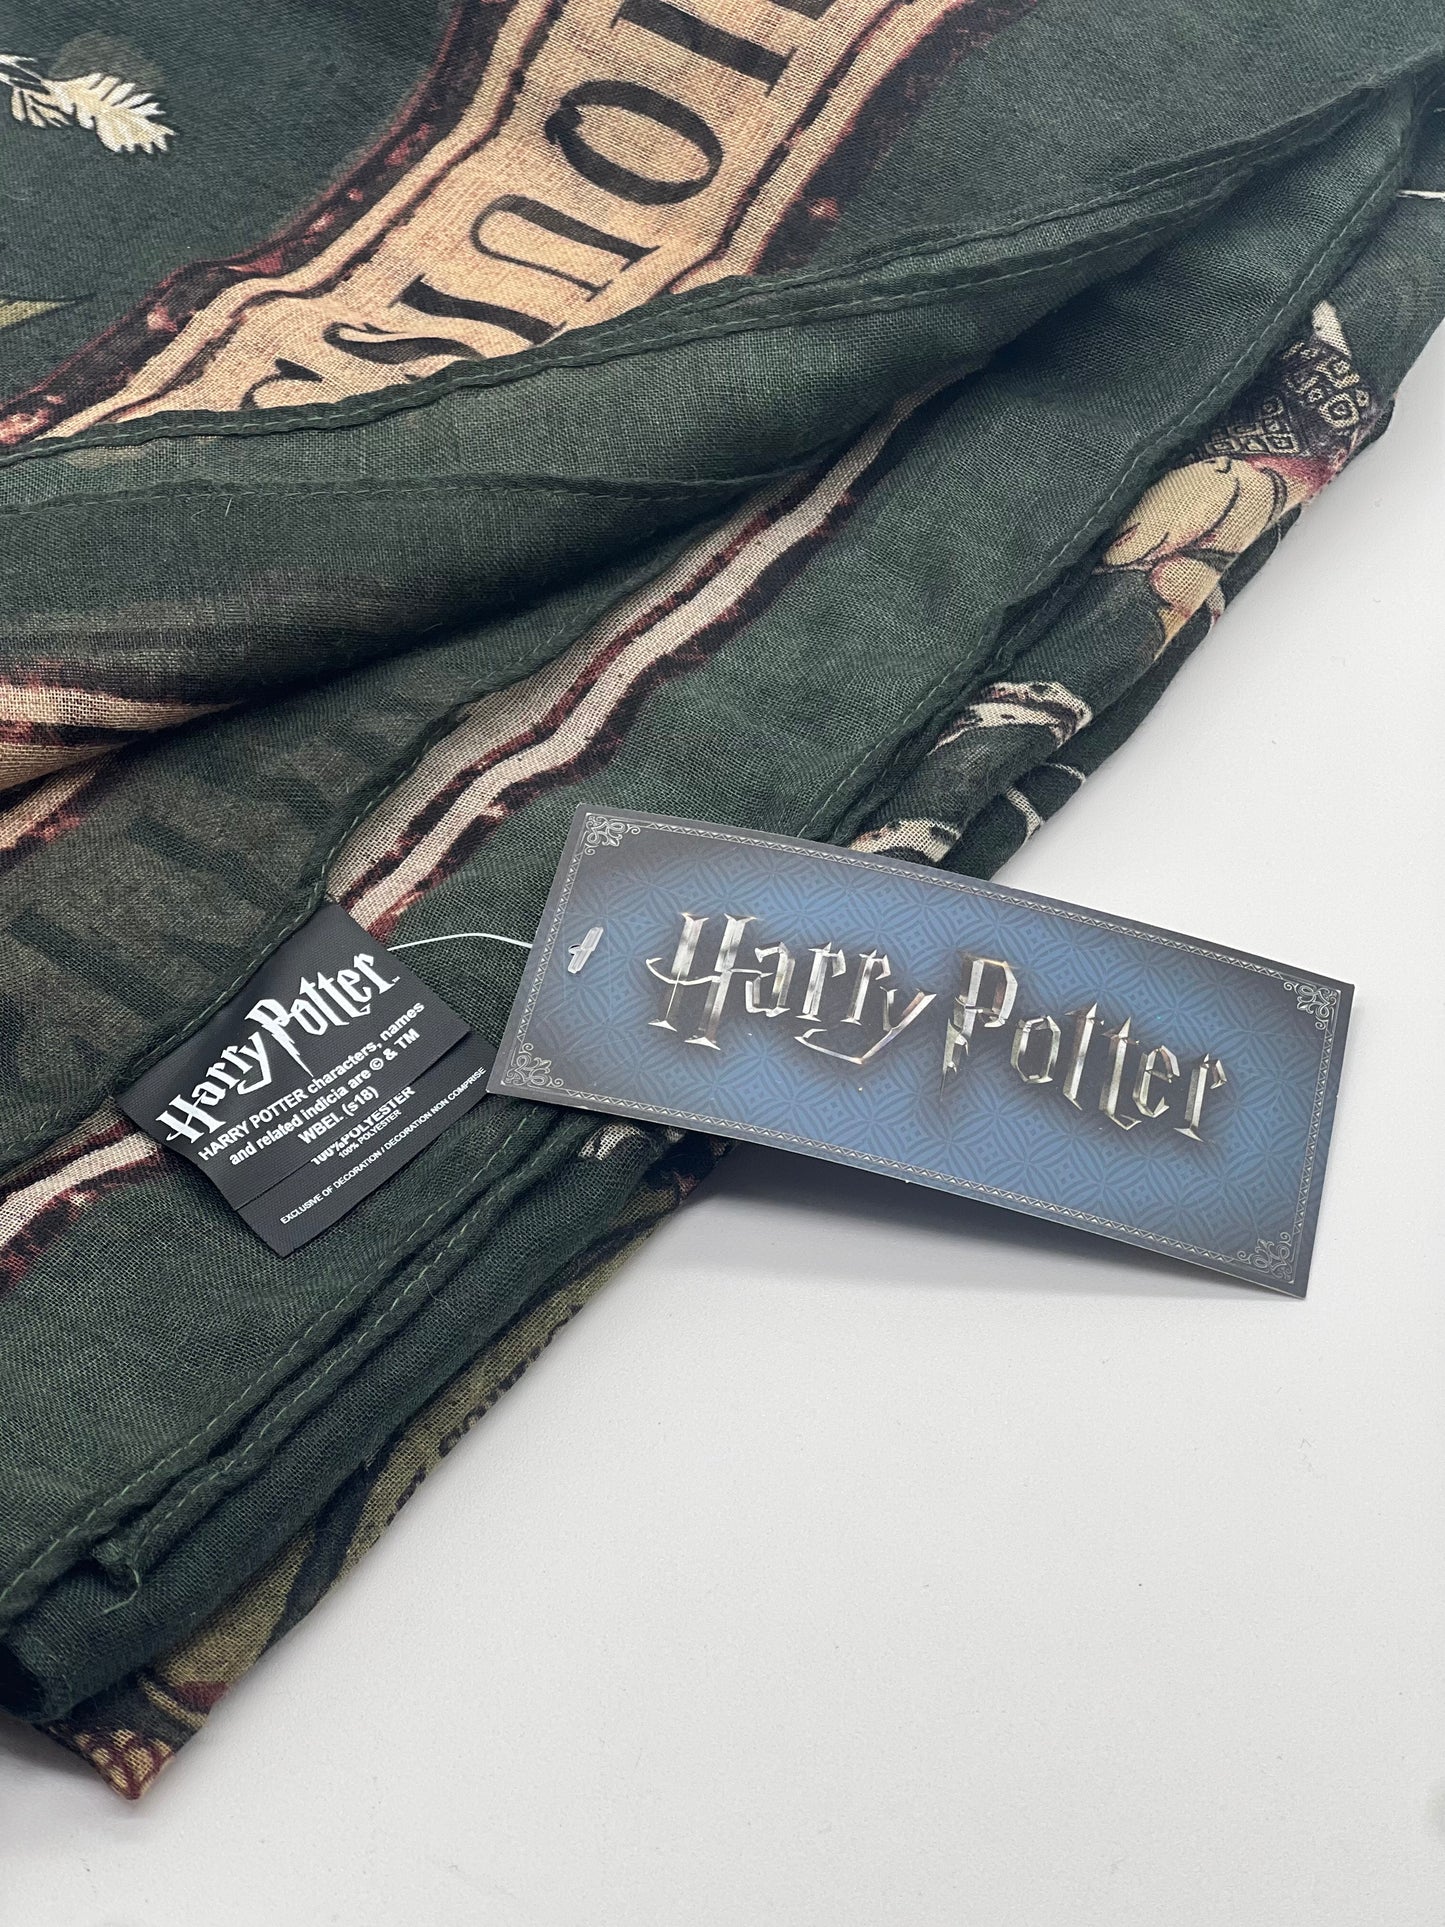 NWT Harry Potter Black Family Tree Tapestry Scarf - Loot Crate Exclusively